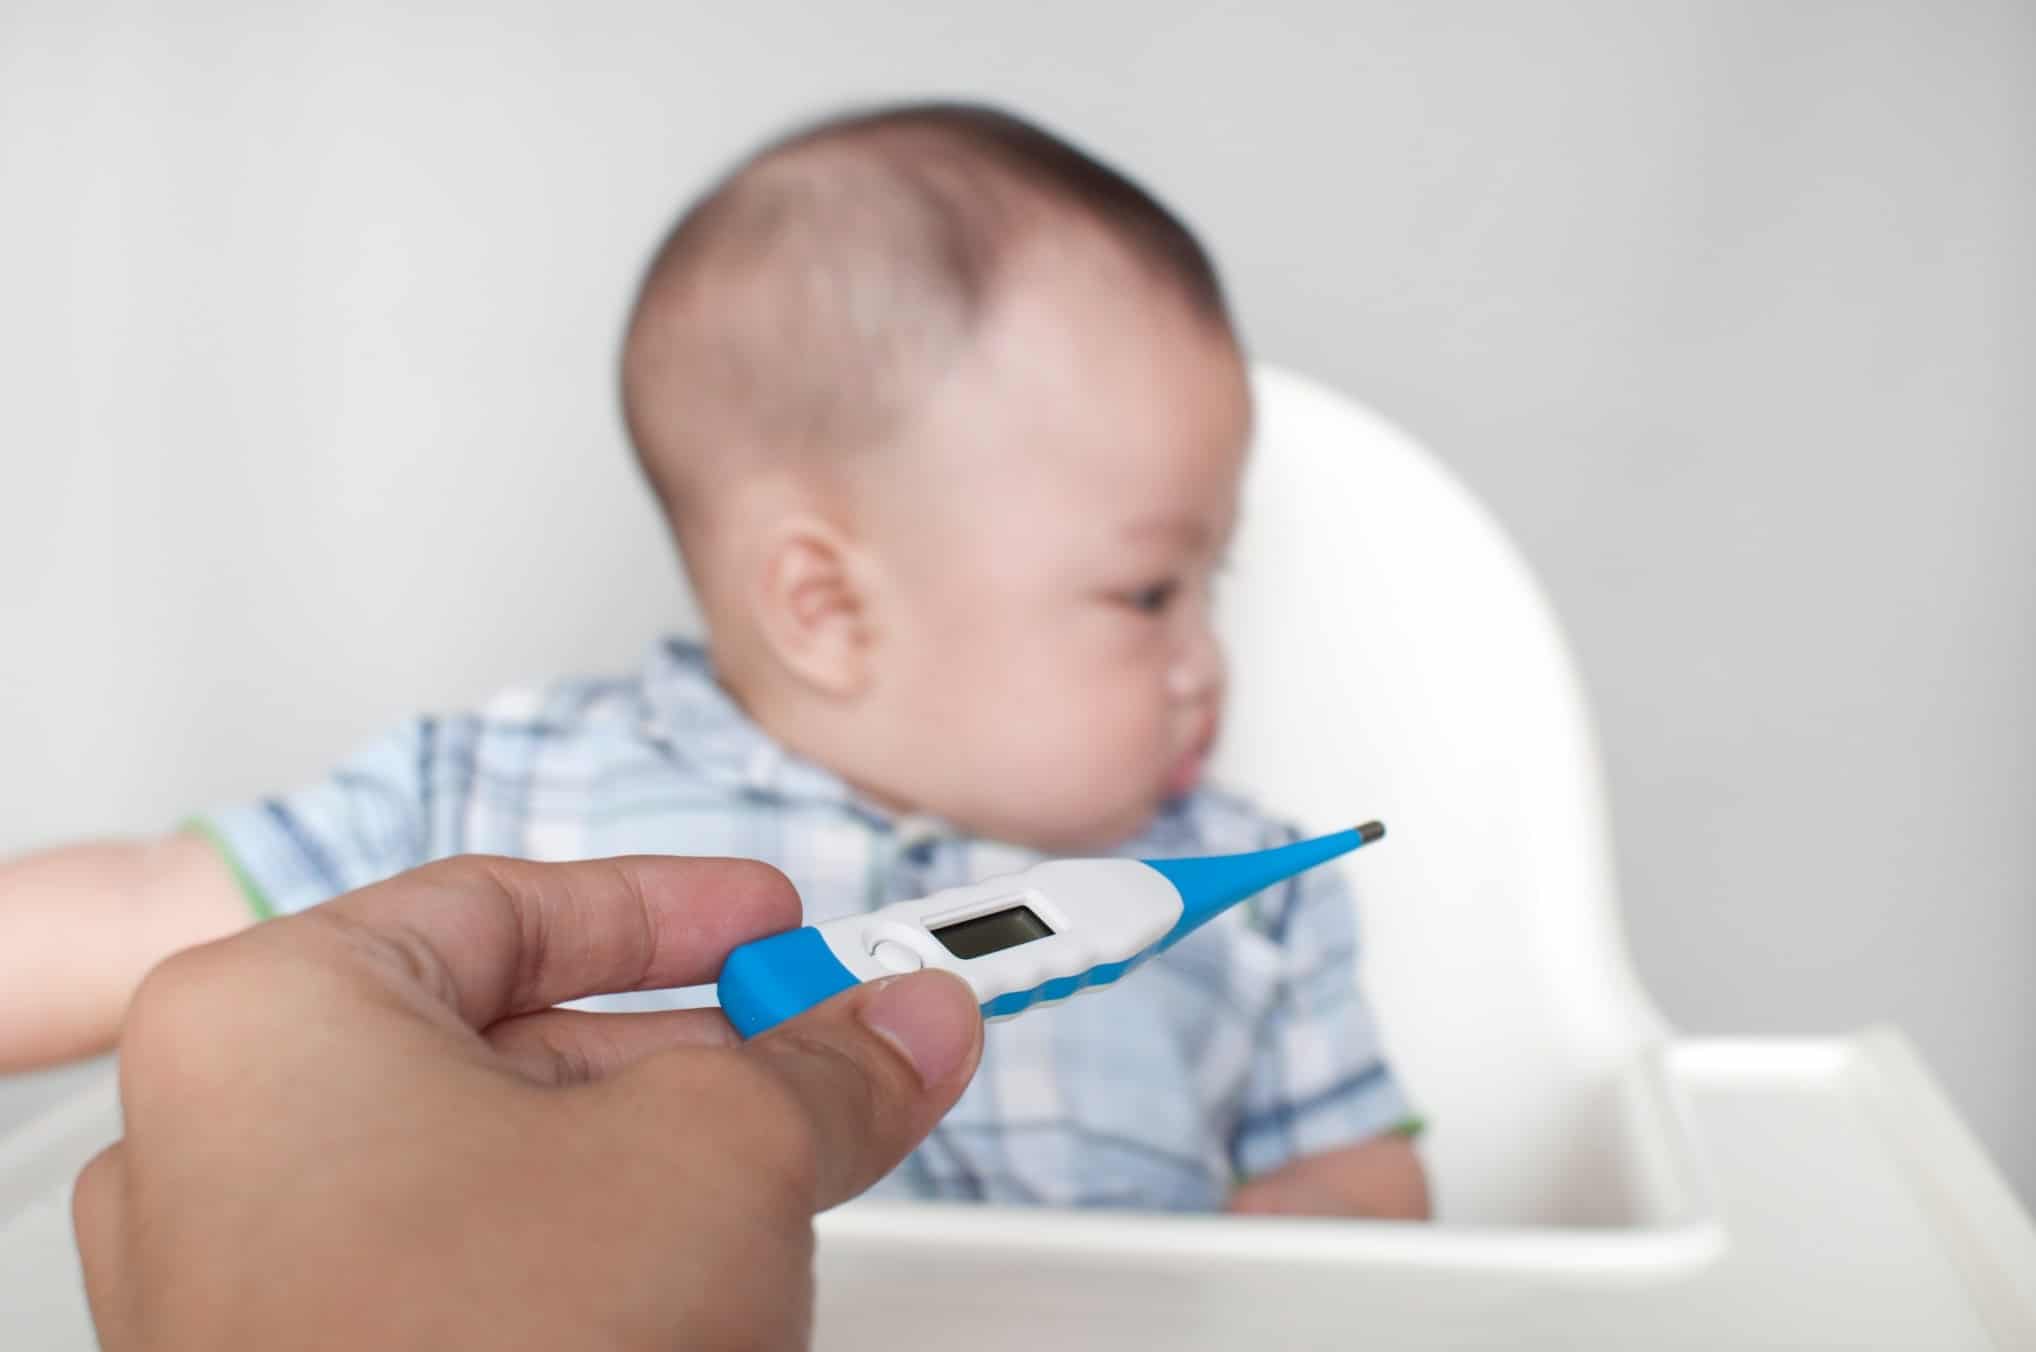 thermometer in front of a baby